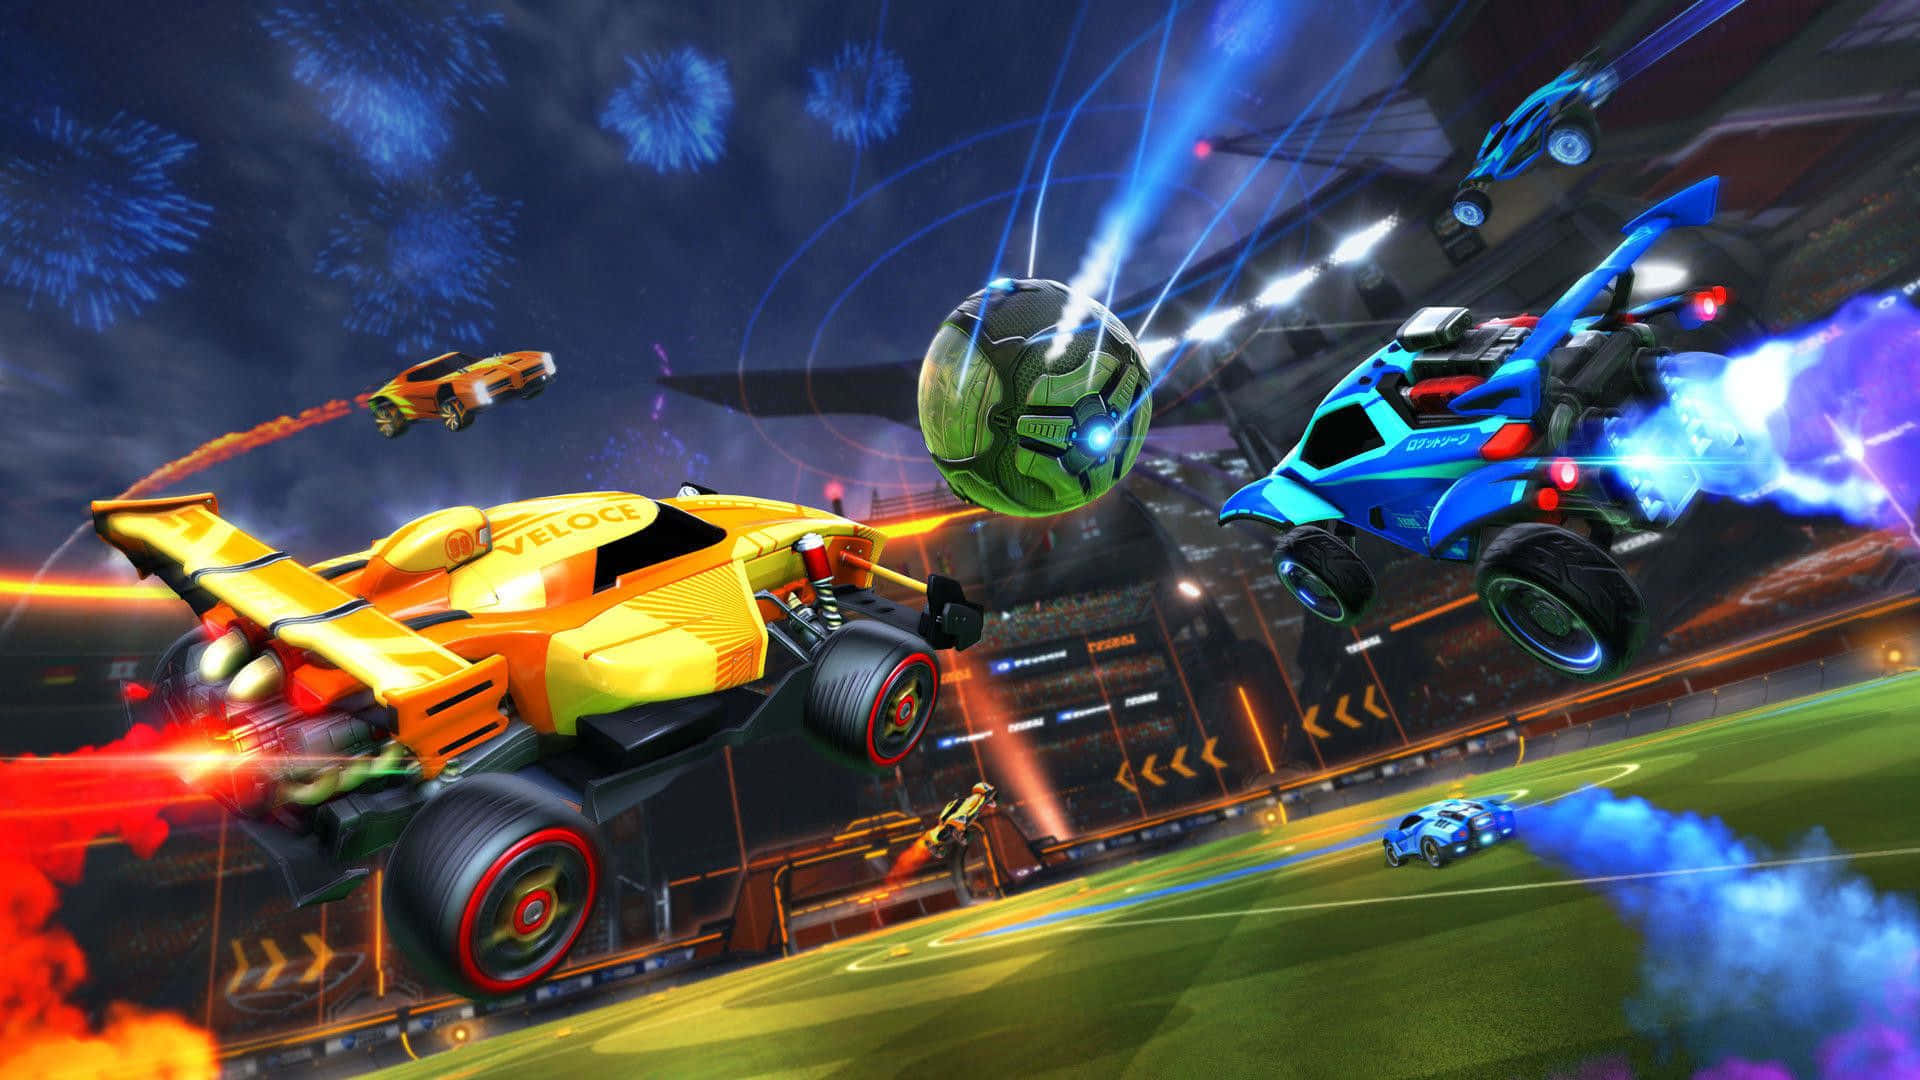 Challenge Yourself and Enjoy an Epic Battle with Rocket League